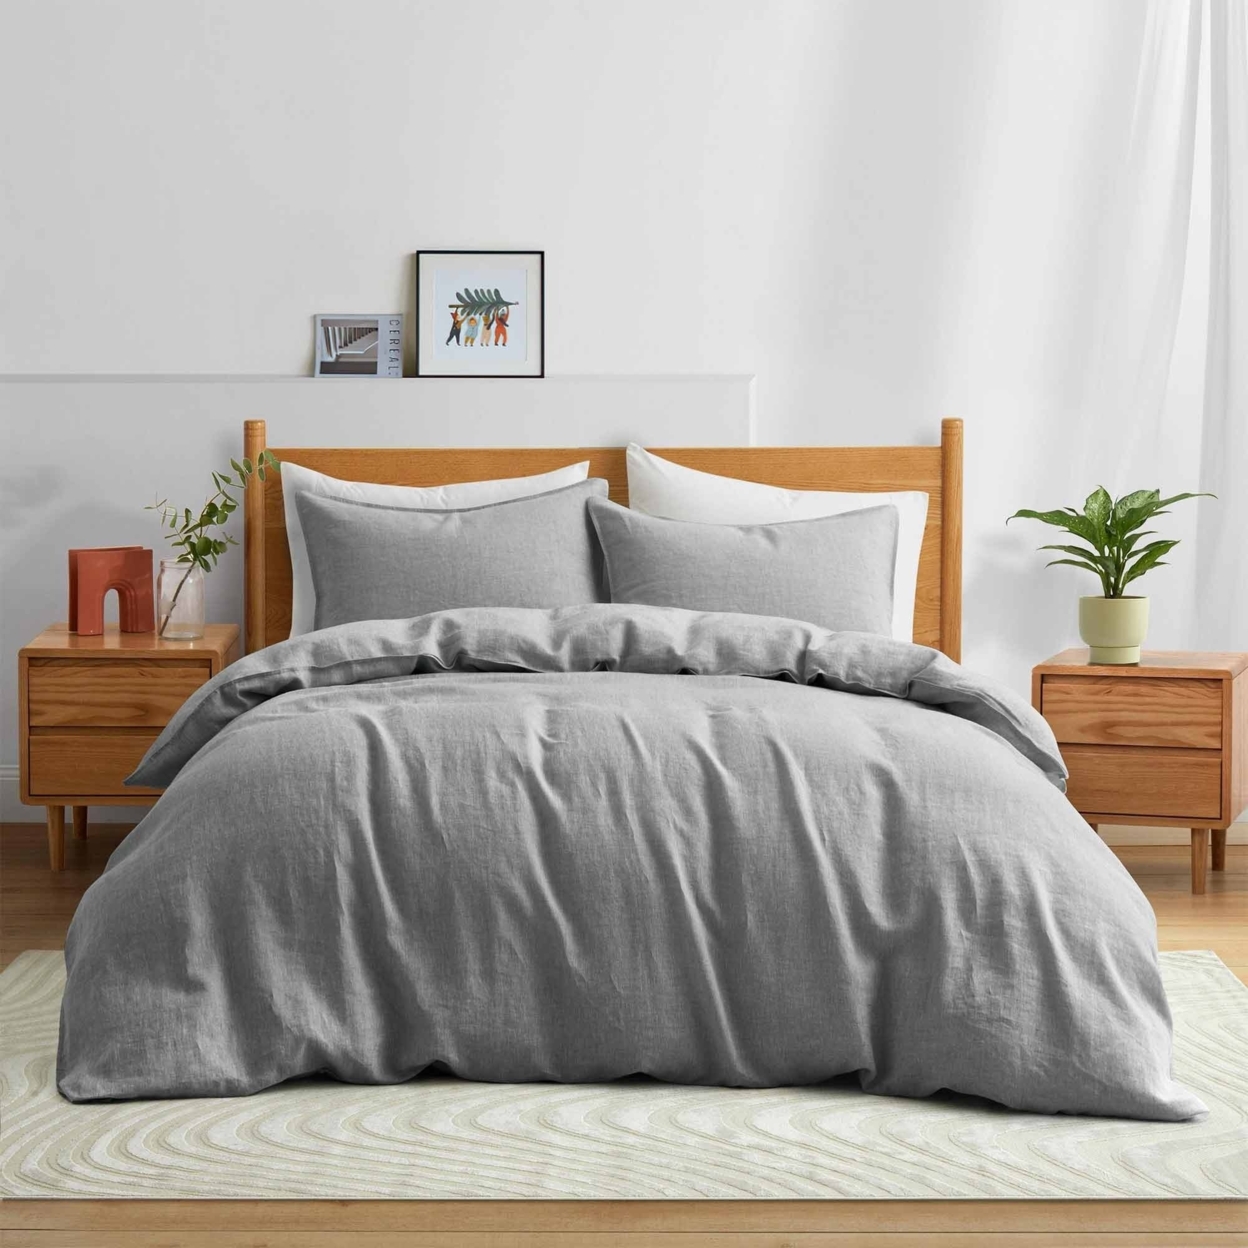 Premium Flax Linen Duvet Cover Set With Pillowcases Moisture Wicking And Breathable - Light Grey, King